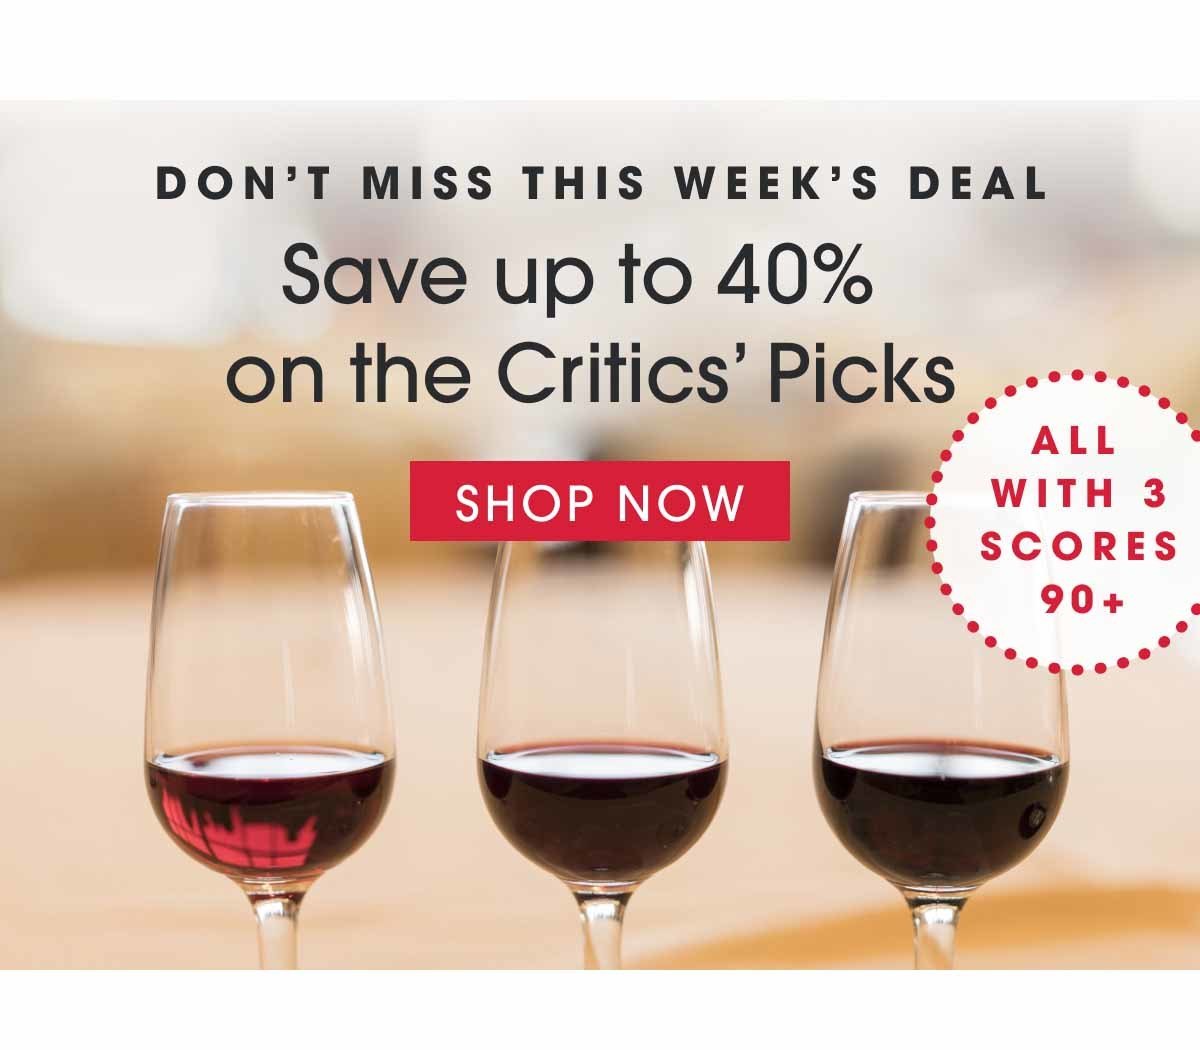 Don't Miss this Week's Savings: Save up to 40% on Critics' Picks